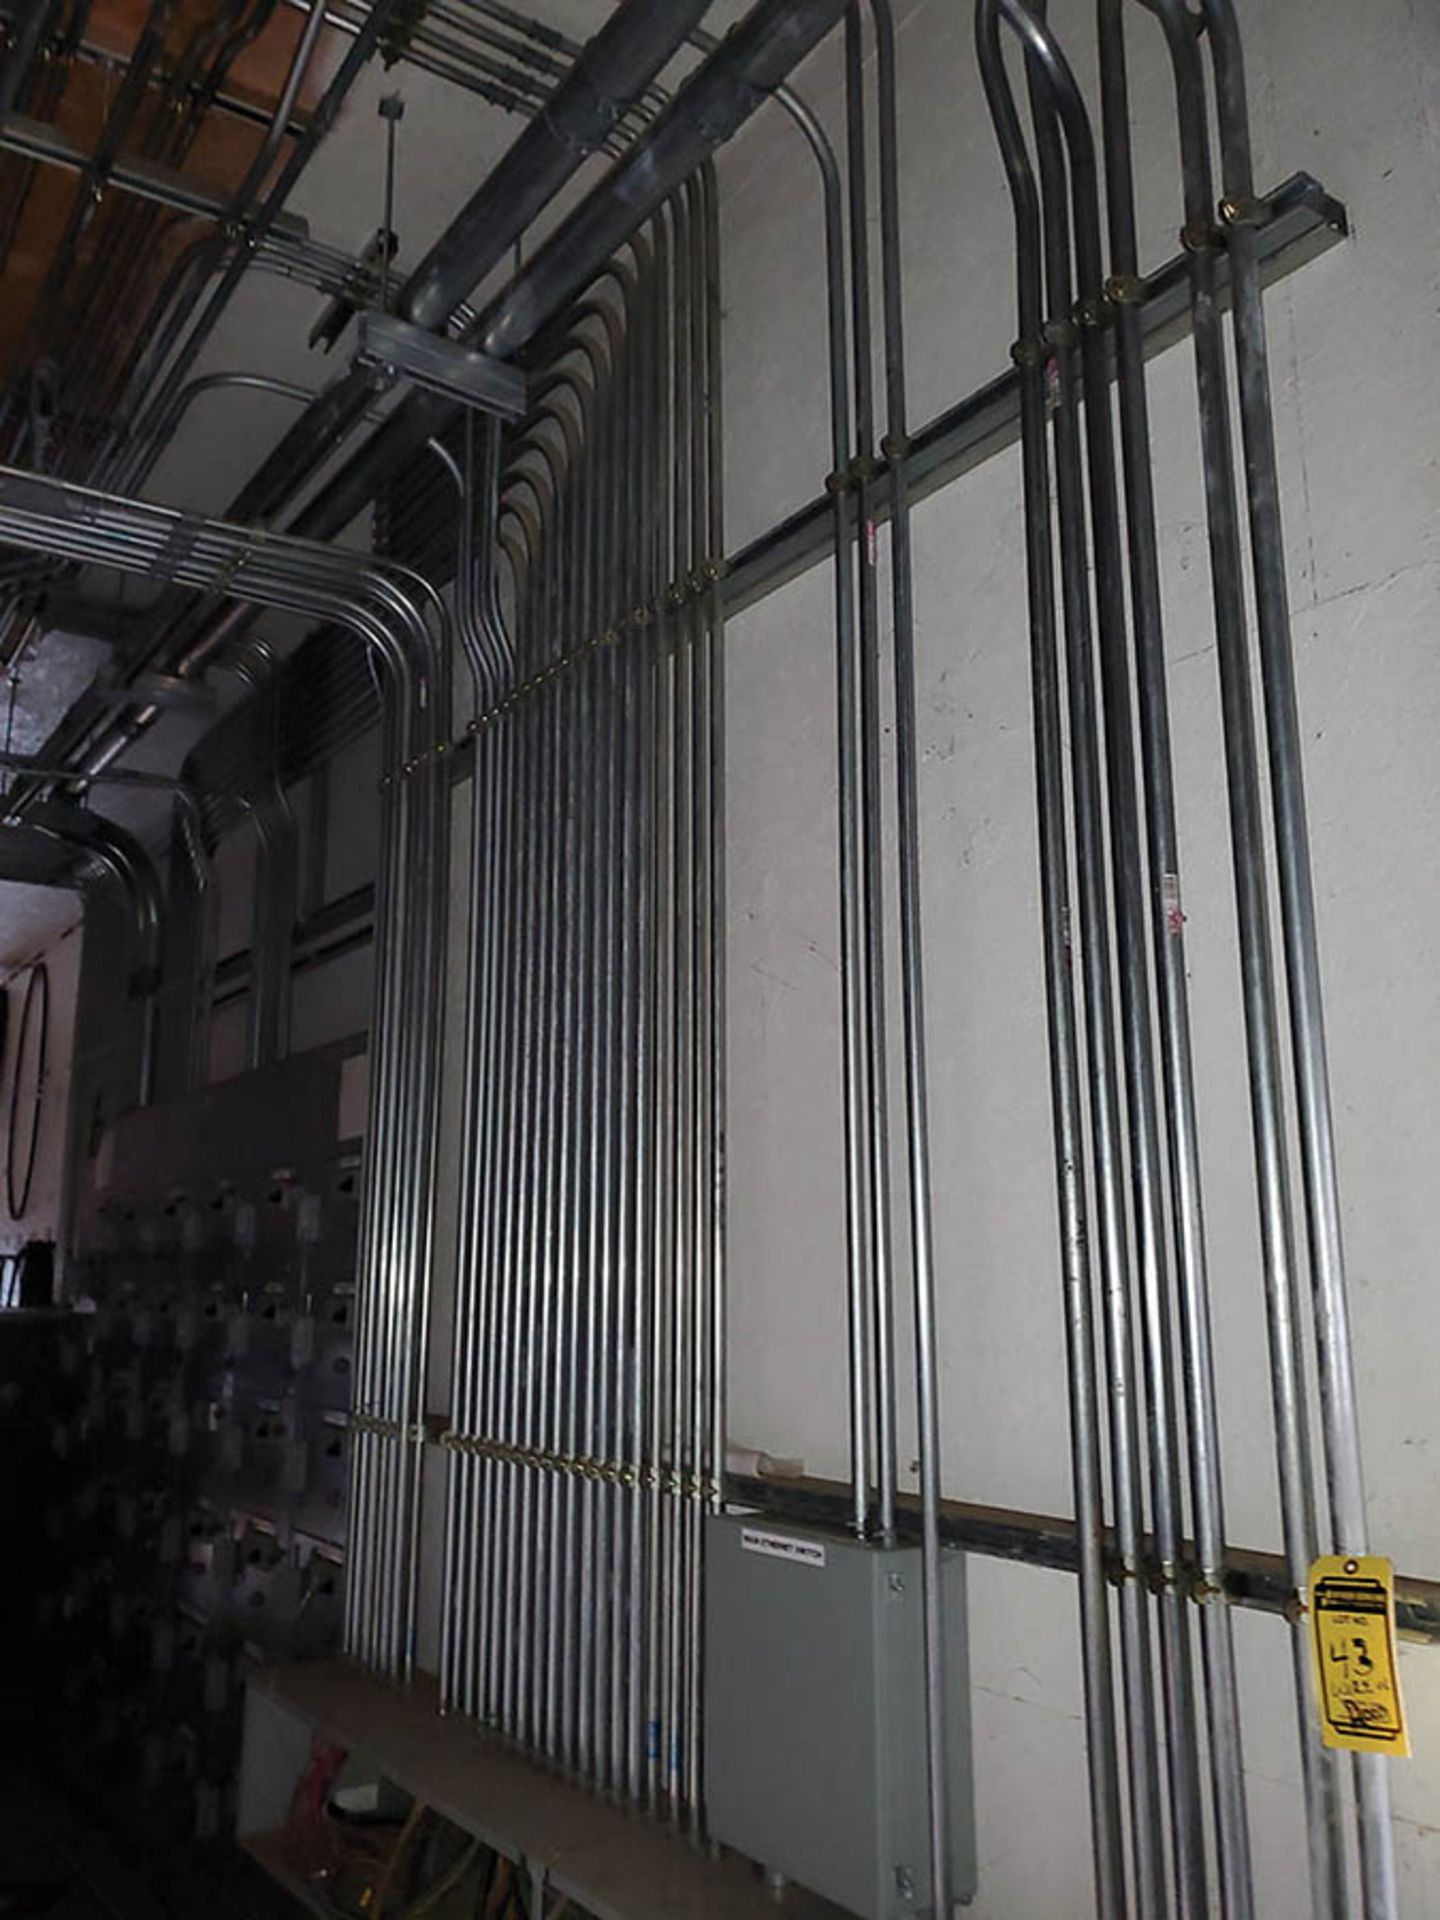 ALL WIRE IN ELECTRICAL ROOM STOPPING AT EACH MCC OR ELECTRICAL PANEL TO POLE - Image 6 of 12